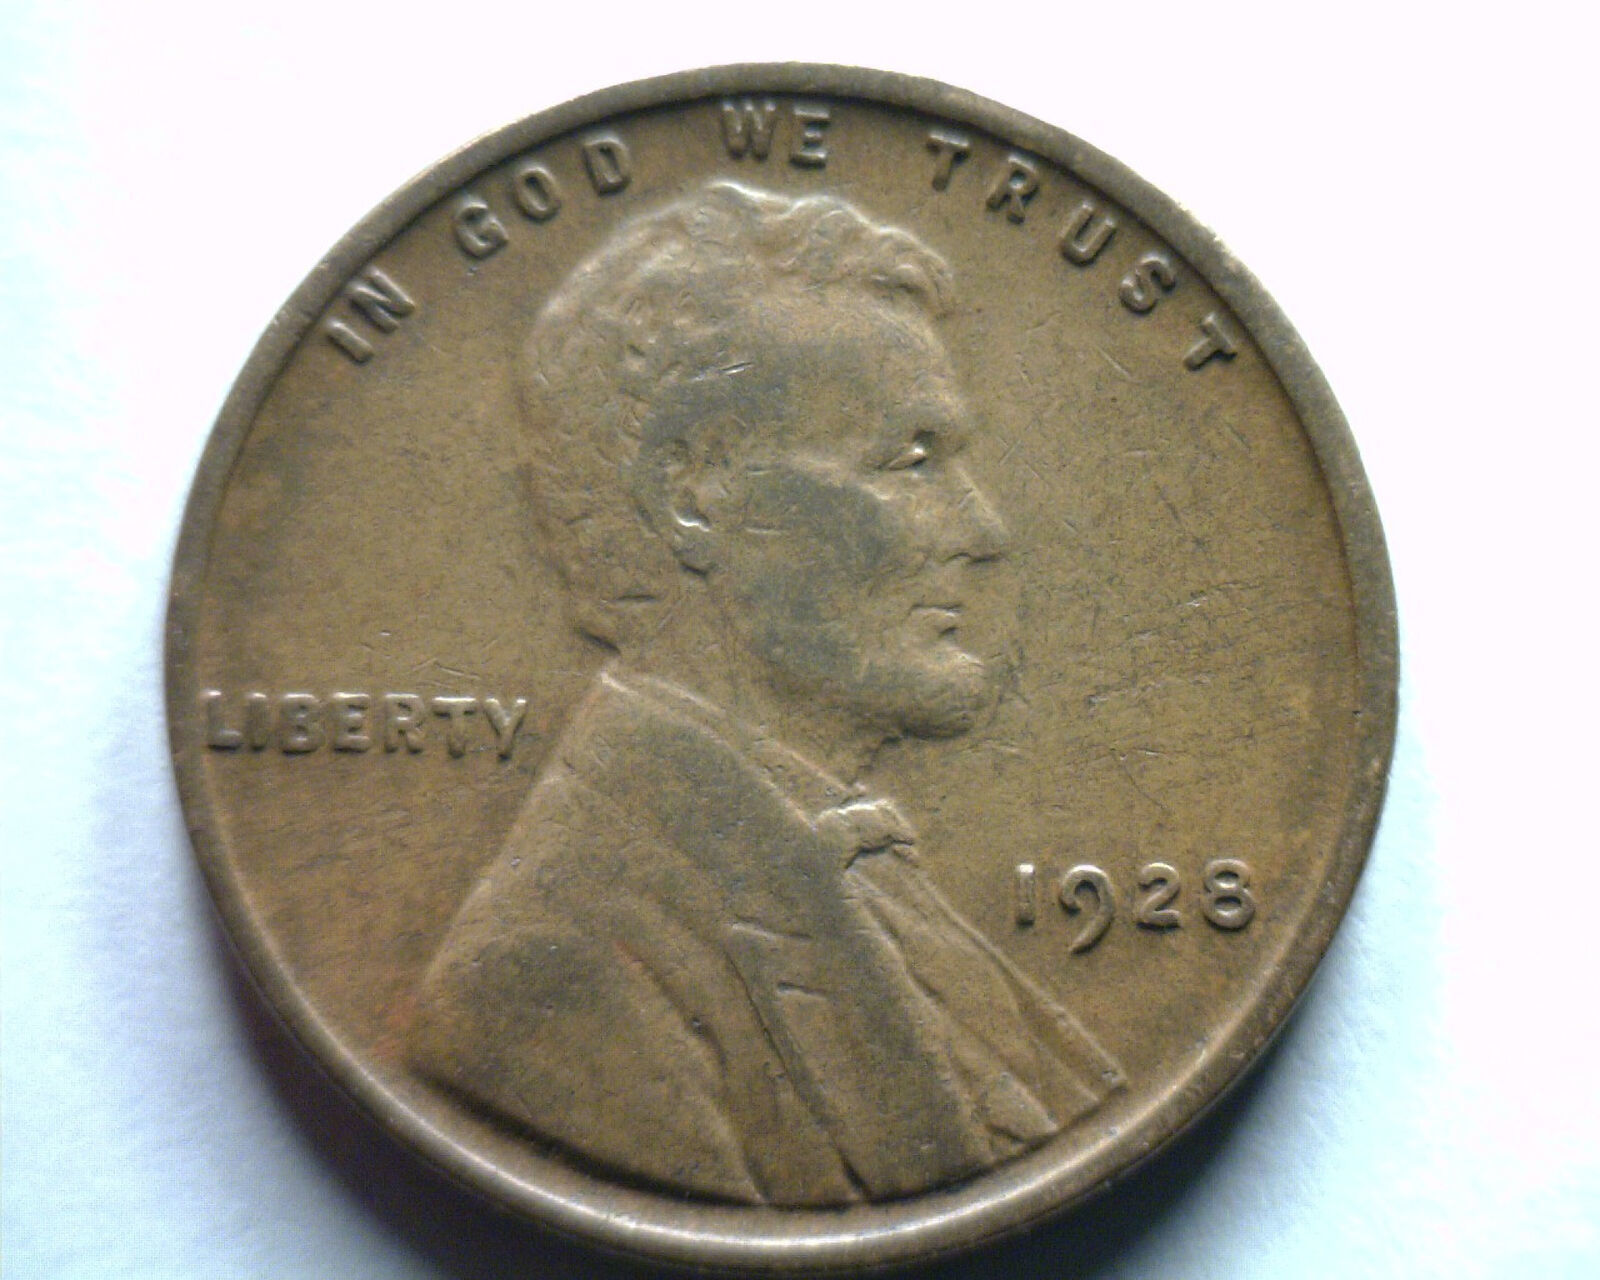 1928 LINCOLN CENT PENNY EXTRA FINE XF EXTREMELY FINE EF NICE ORIGINAL 99c SHIP - $2.50